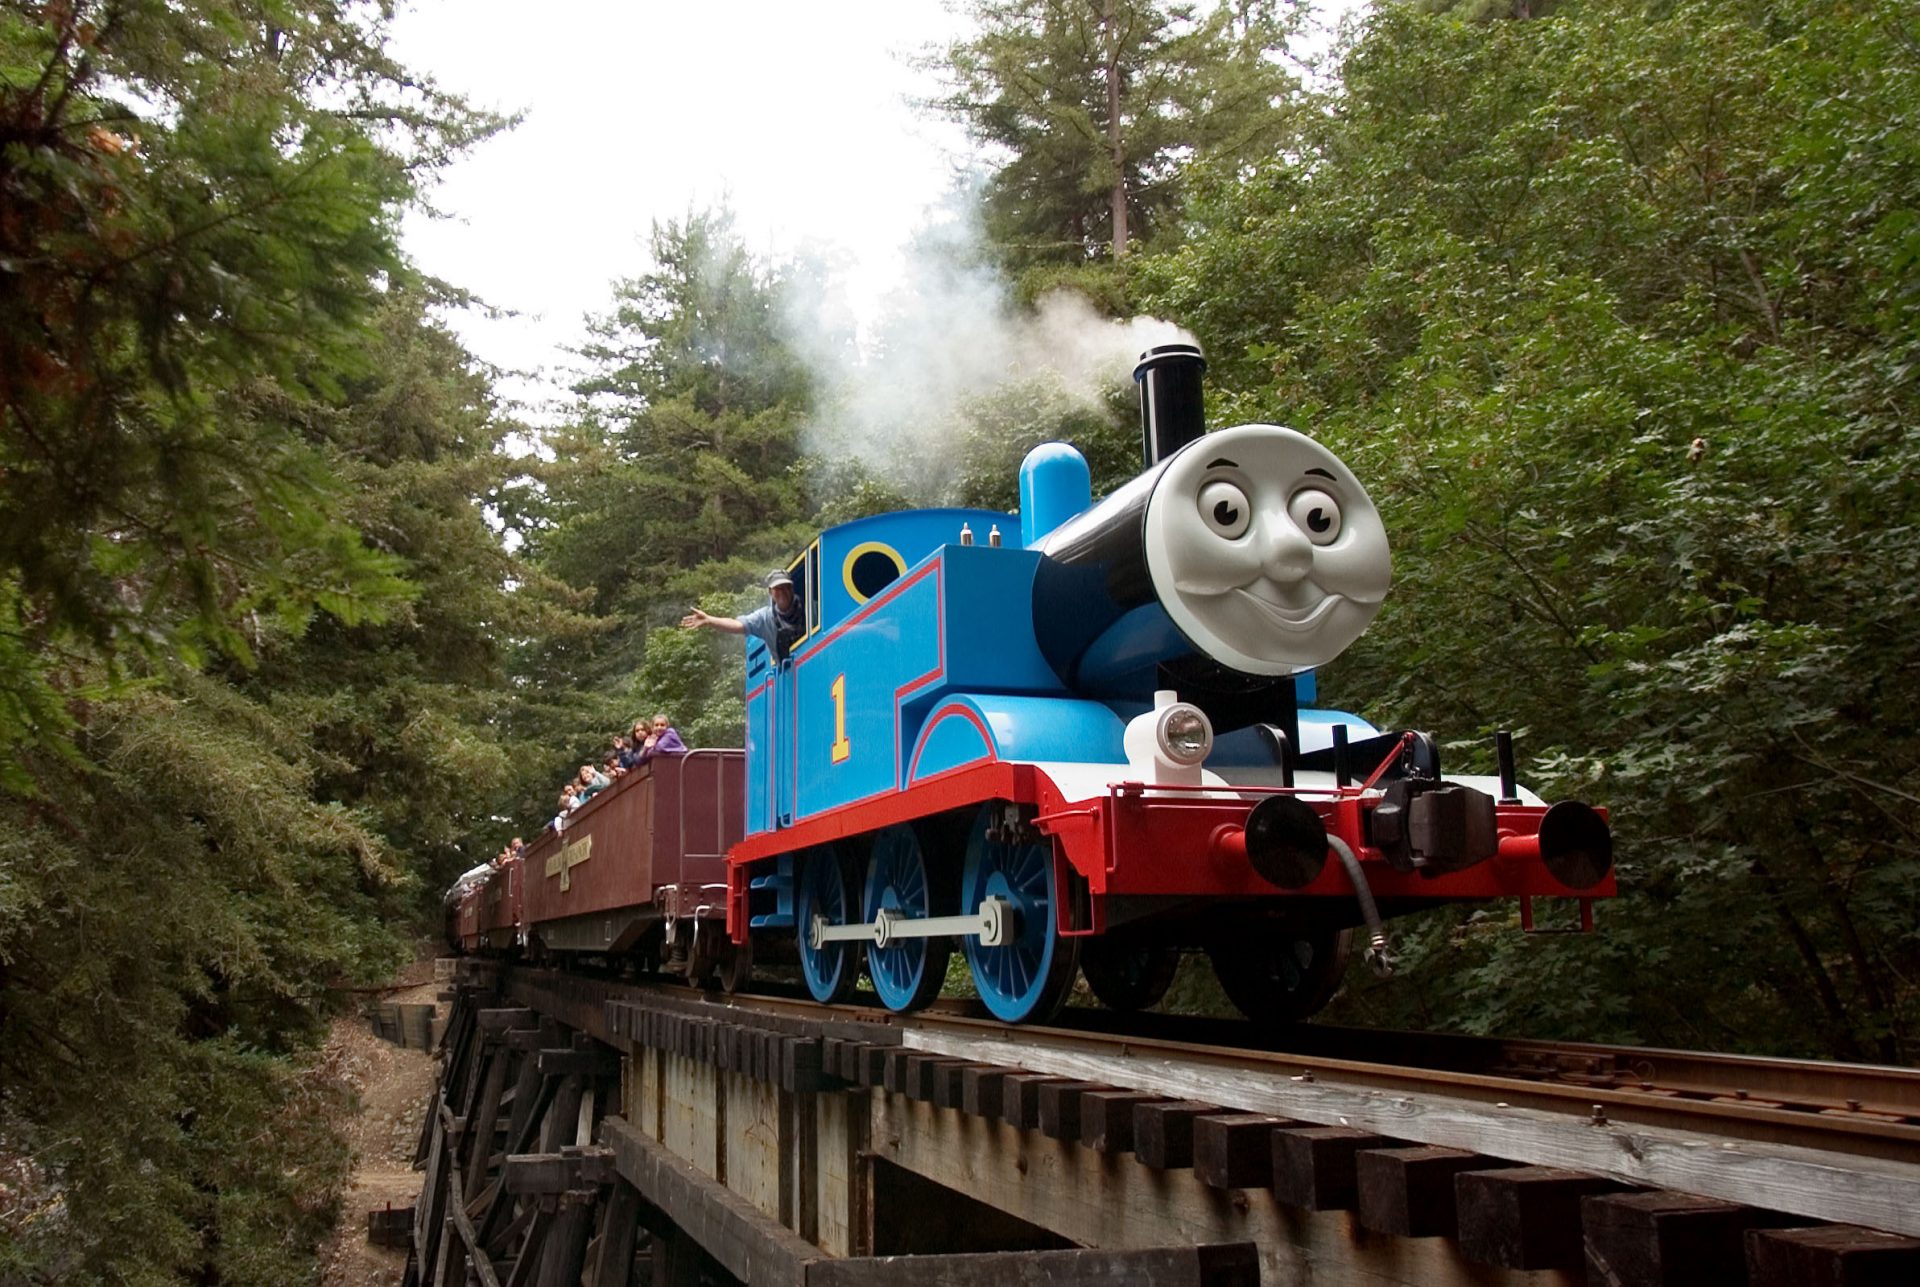 Thomas The Tank Engine - Puffing Billy.